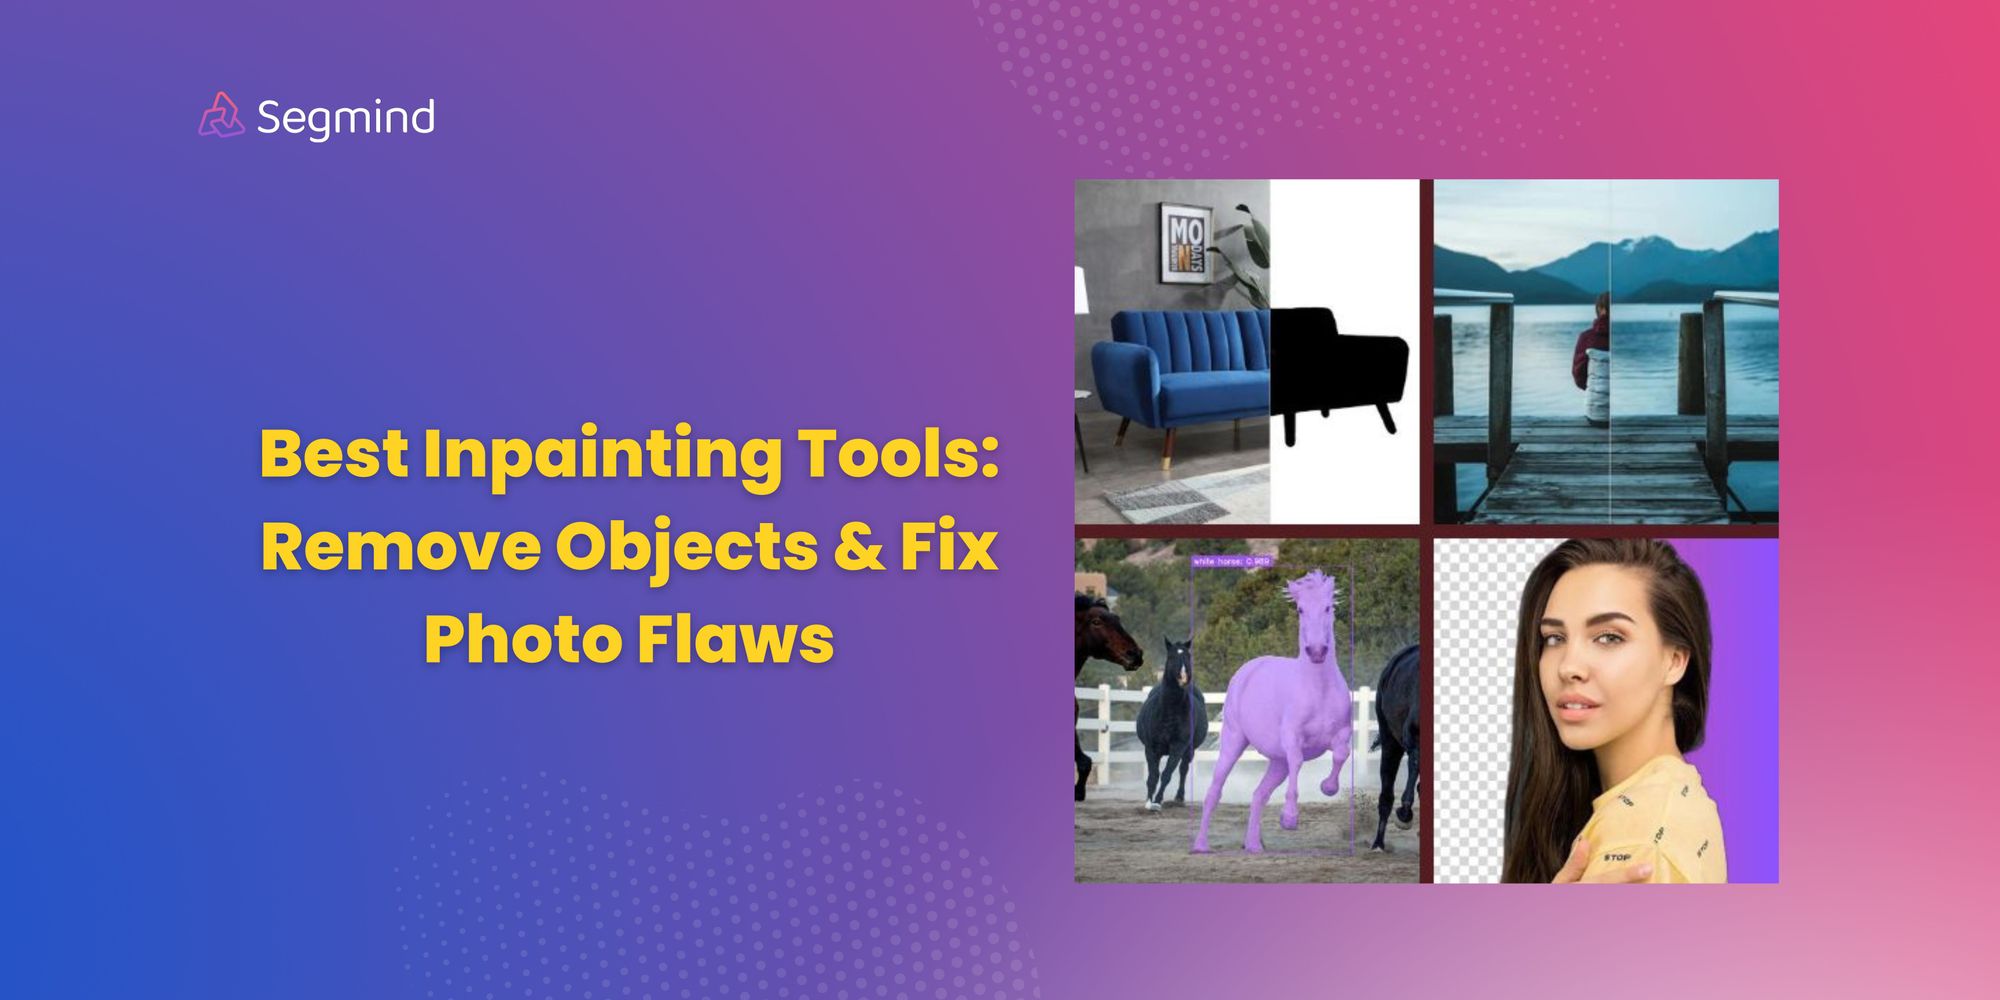 Best Inpainting Tools: Remove Objects & Fix Photo Flaws